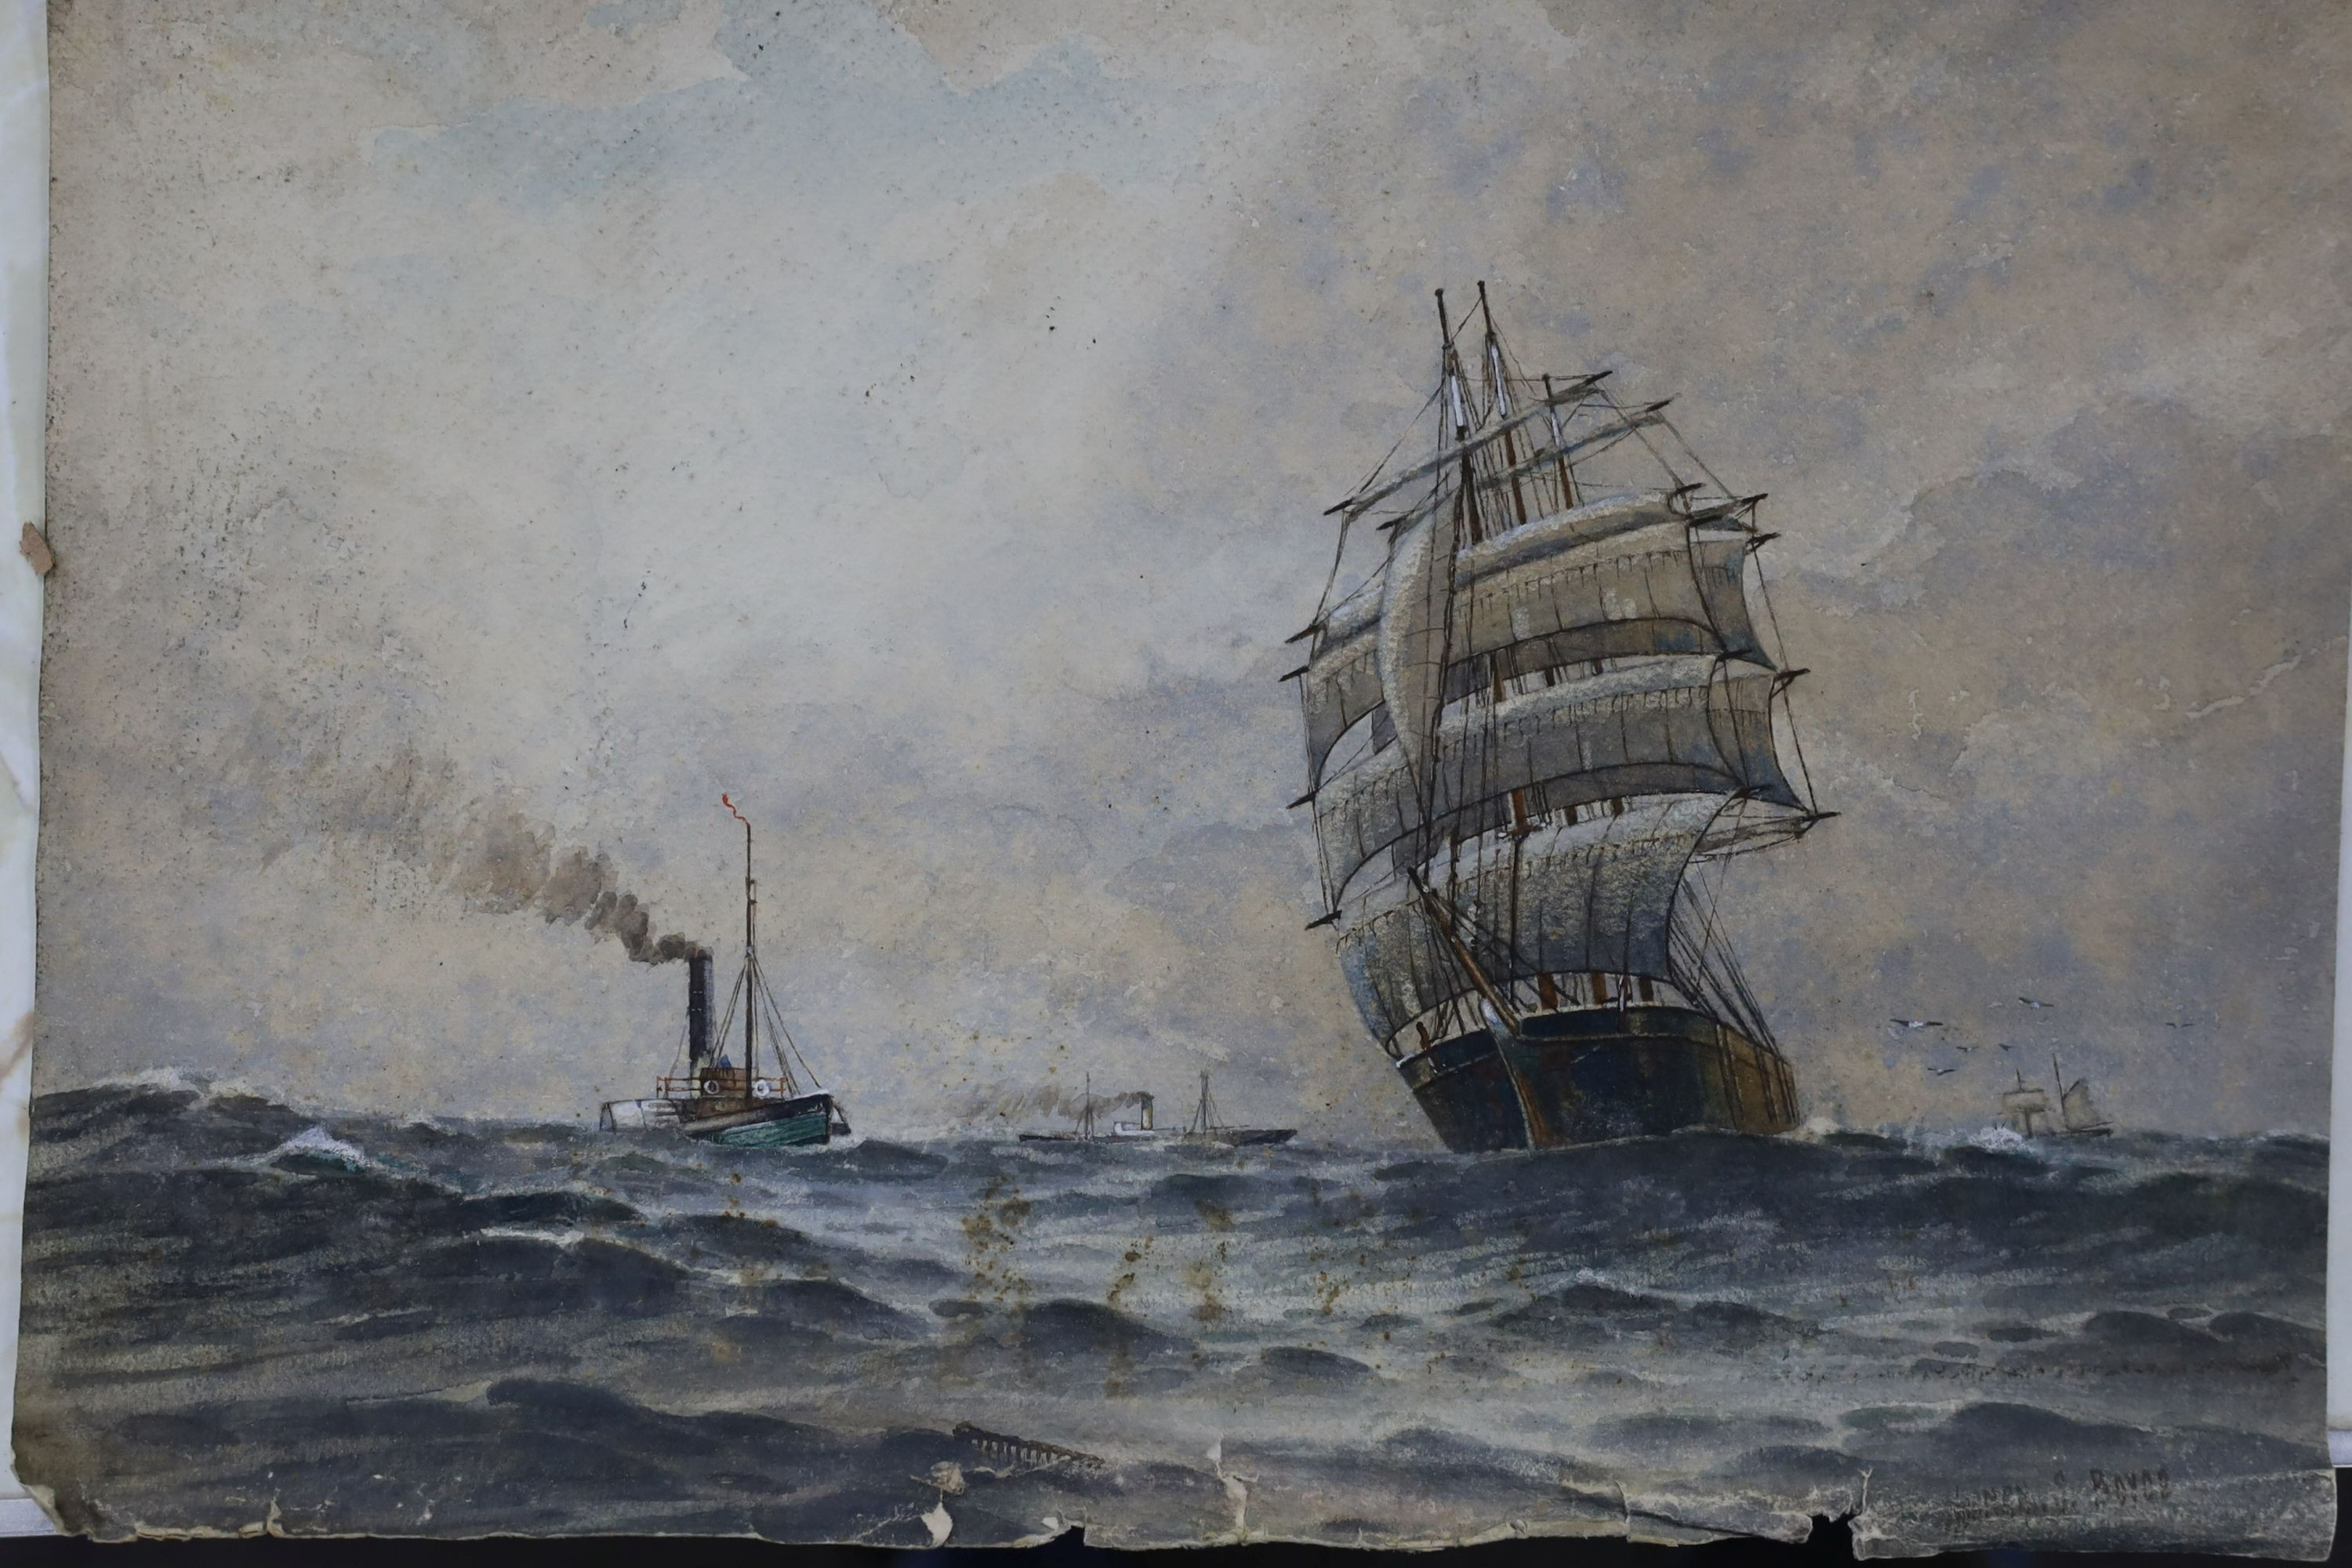 Norman Septimus Boyce (1895-1962), six watercolours, Shipping off the coast, signed, largest 26 x 39cm, unframed